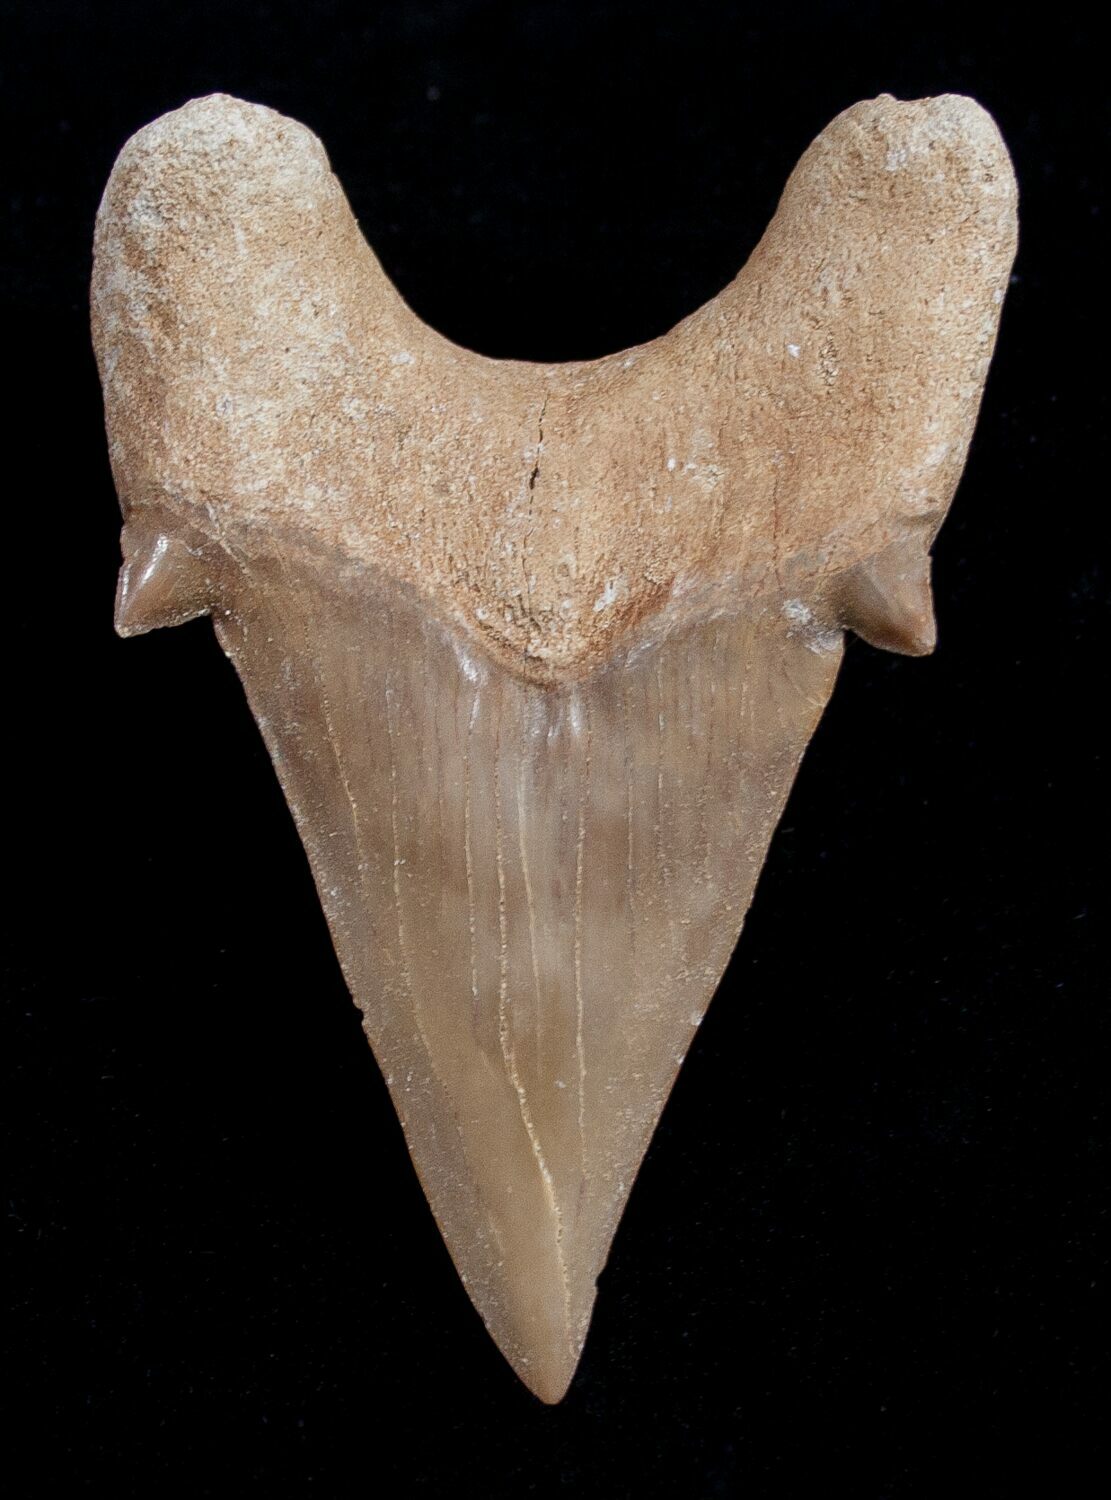 High Quality Otodus Fossil Shark Tooth For Sale (#1747) - FossilEra.com